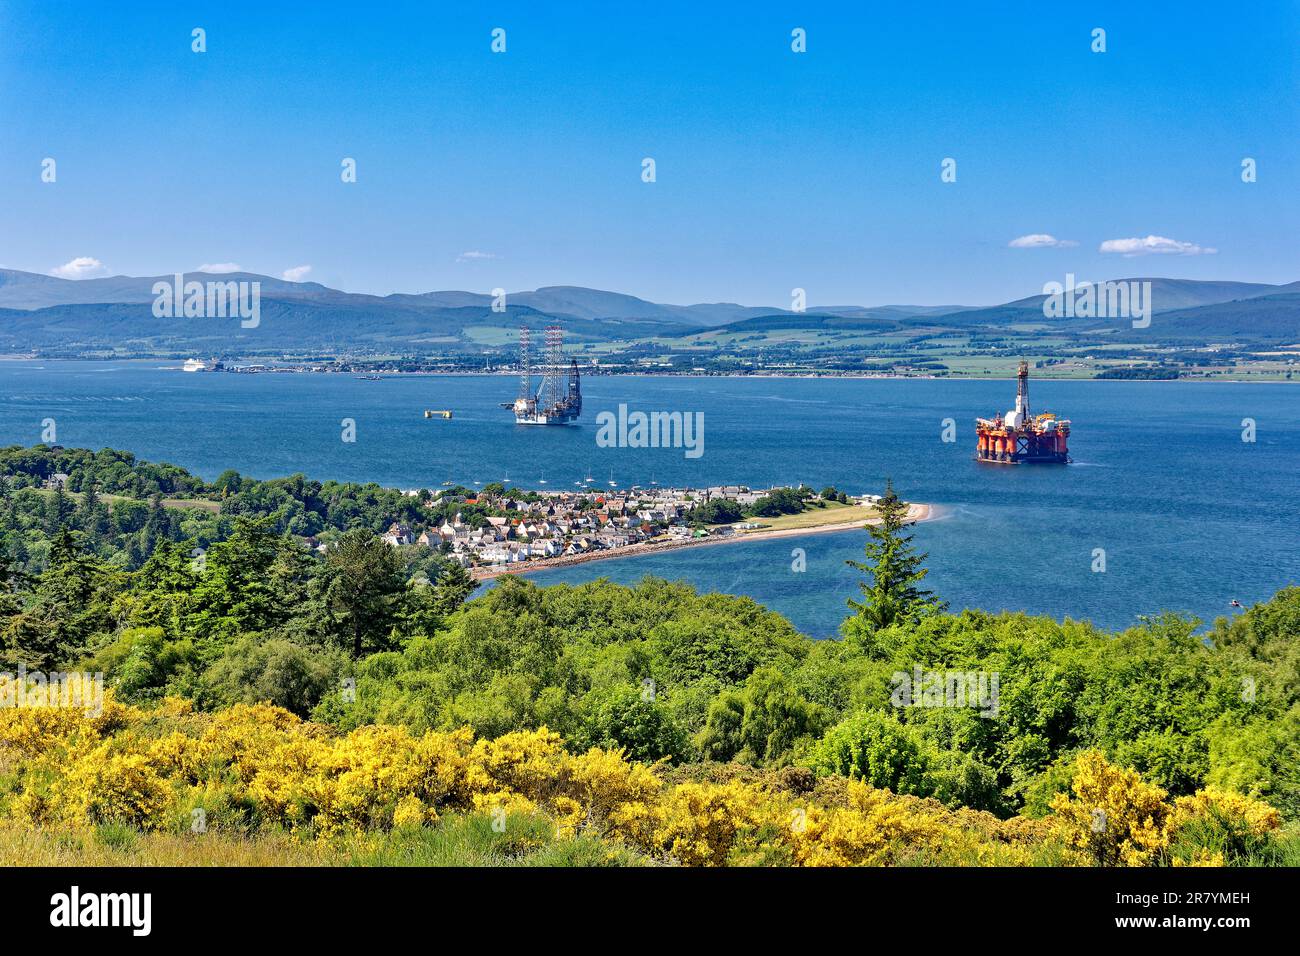 Cromarty Scotland Cromarty Firth blue sky and a view over the town the houses and orange oil rig towards the hills in early summer Stock Photo